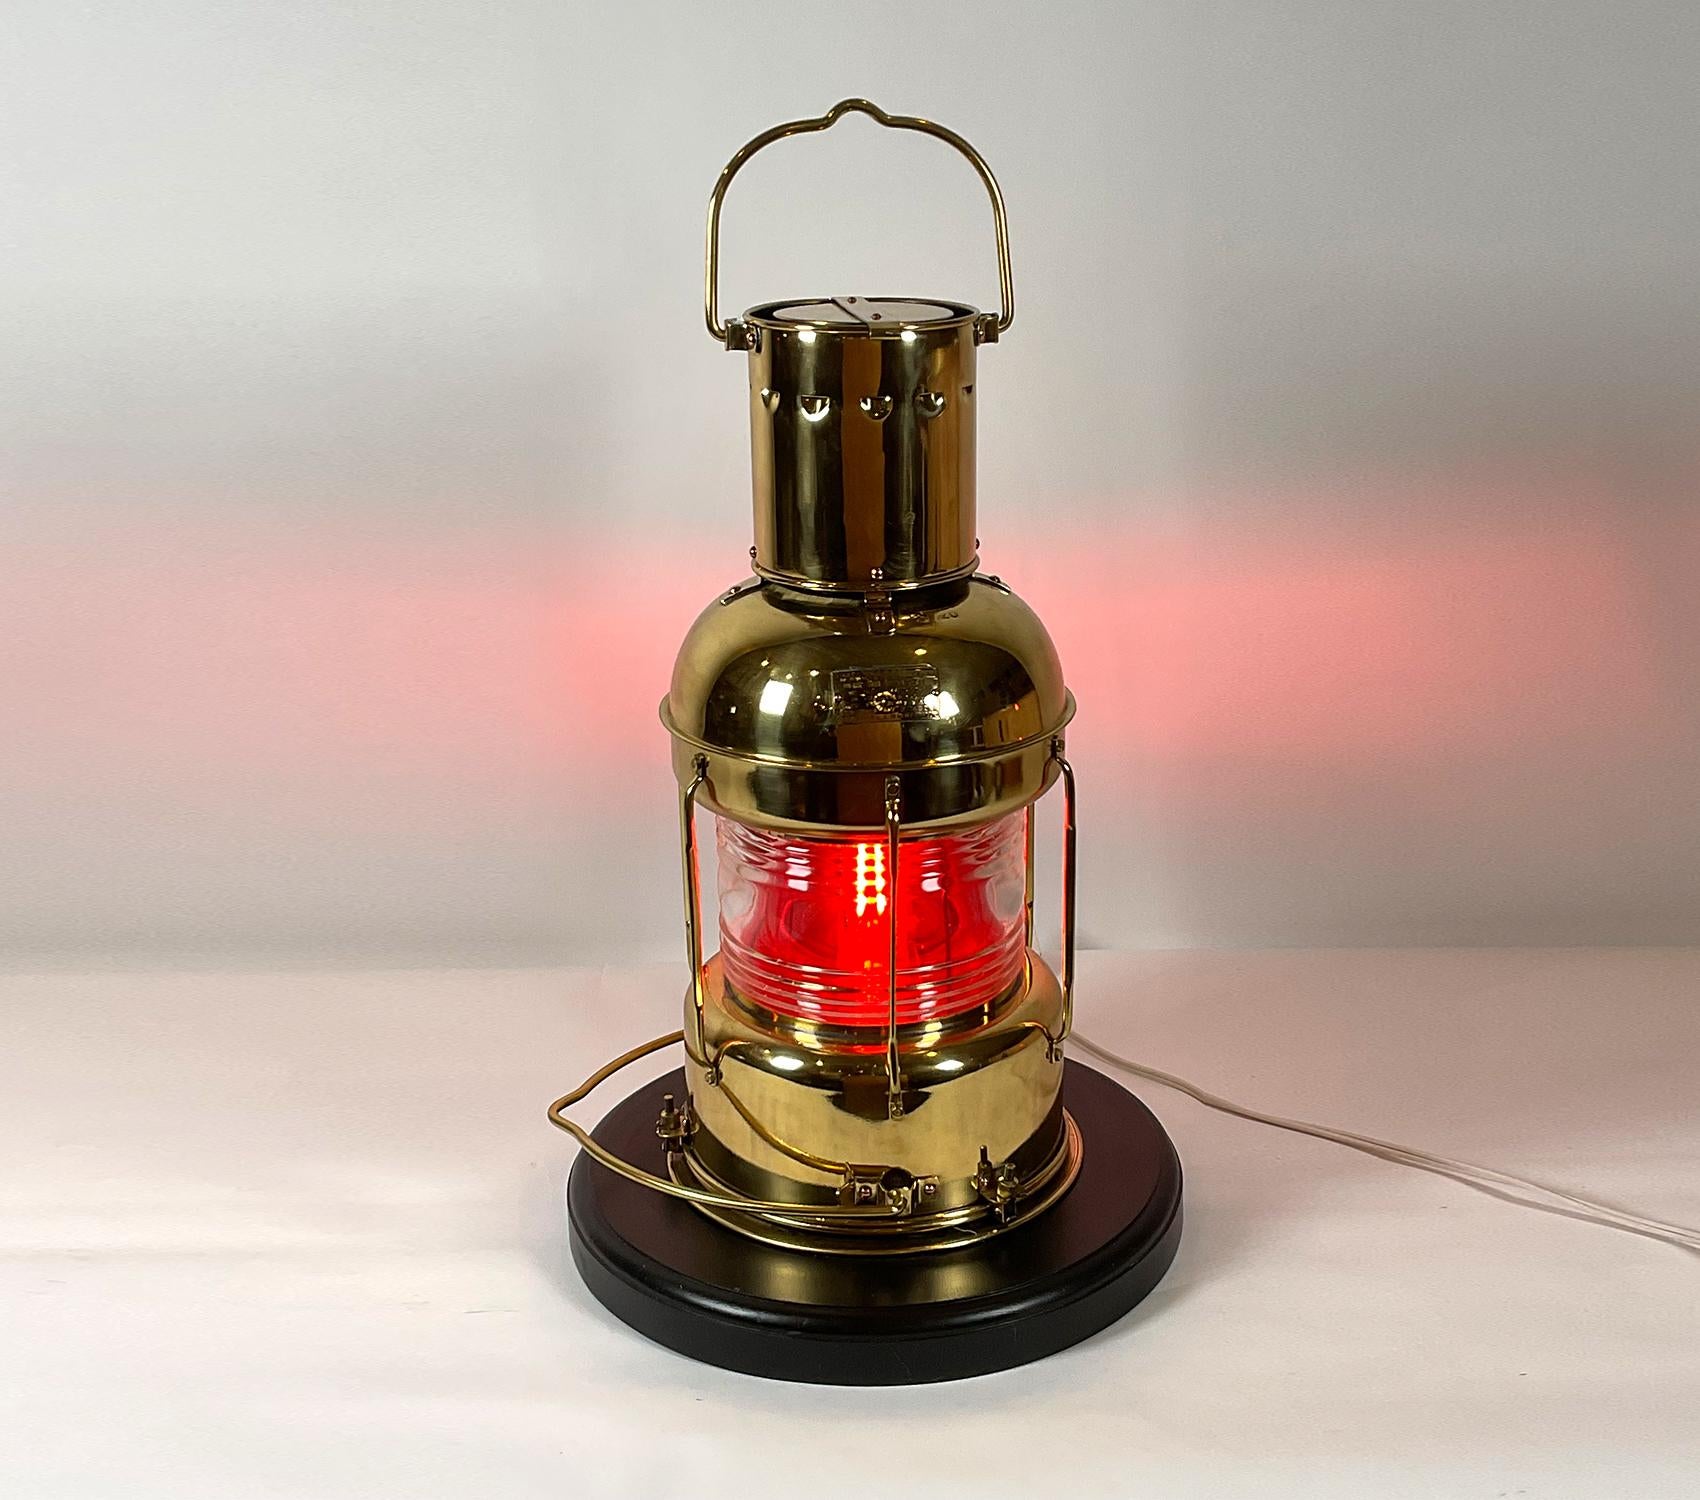 Brass ship’s lantern with clear Fresnel glass lens with removable red lens. Meticulously polished and lacquered. Mounted to a thick wood base with routed edge. Wired for electricity. Very fine condition. This would have been a back up oil lantern